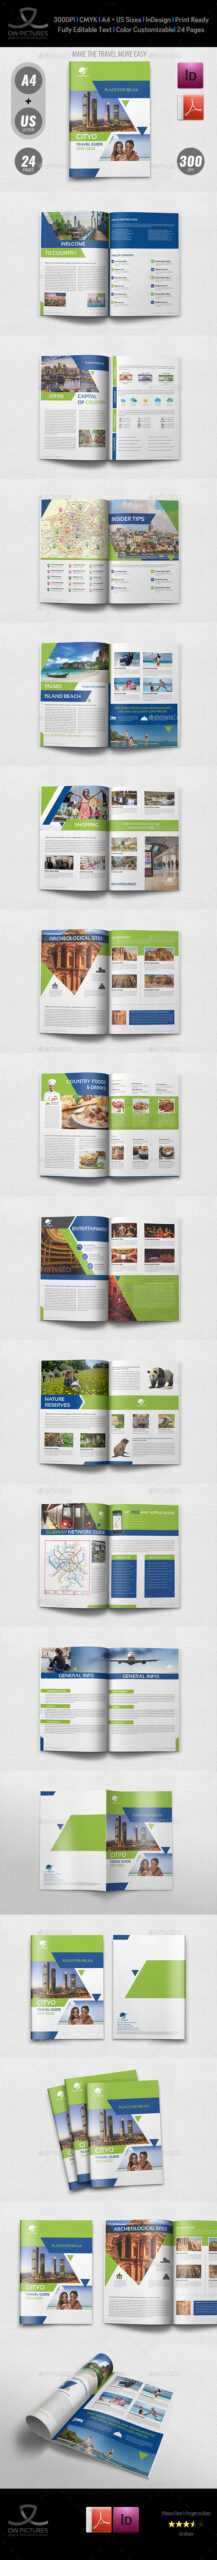 Travel Guide Graphics, Designs & Templates From Graphicriver Regarding Travel Guide Brochure Template